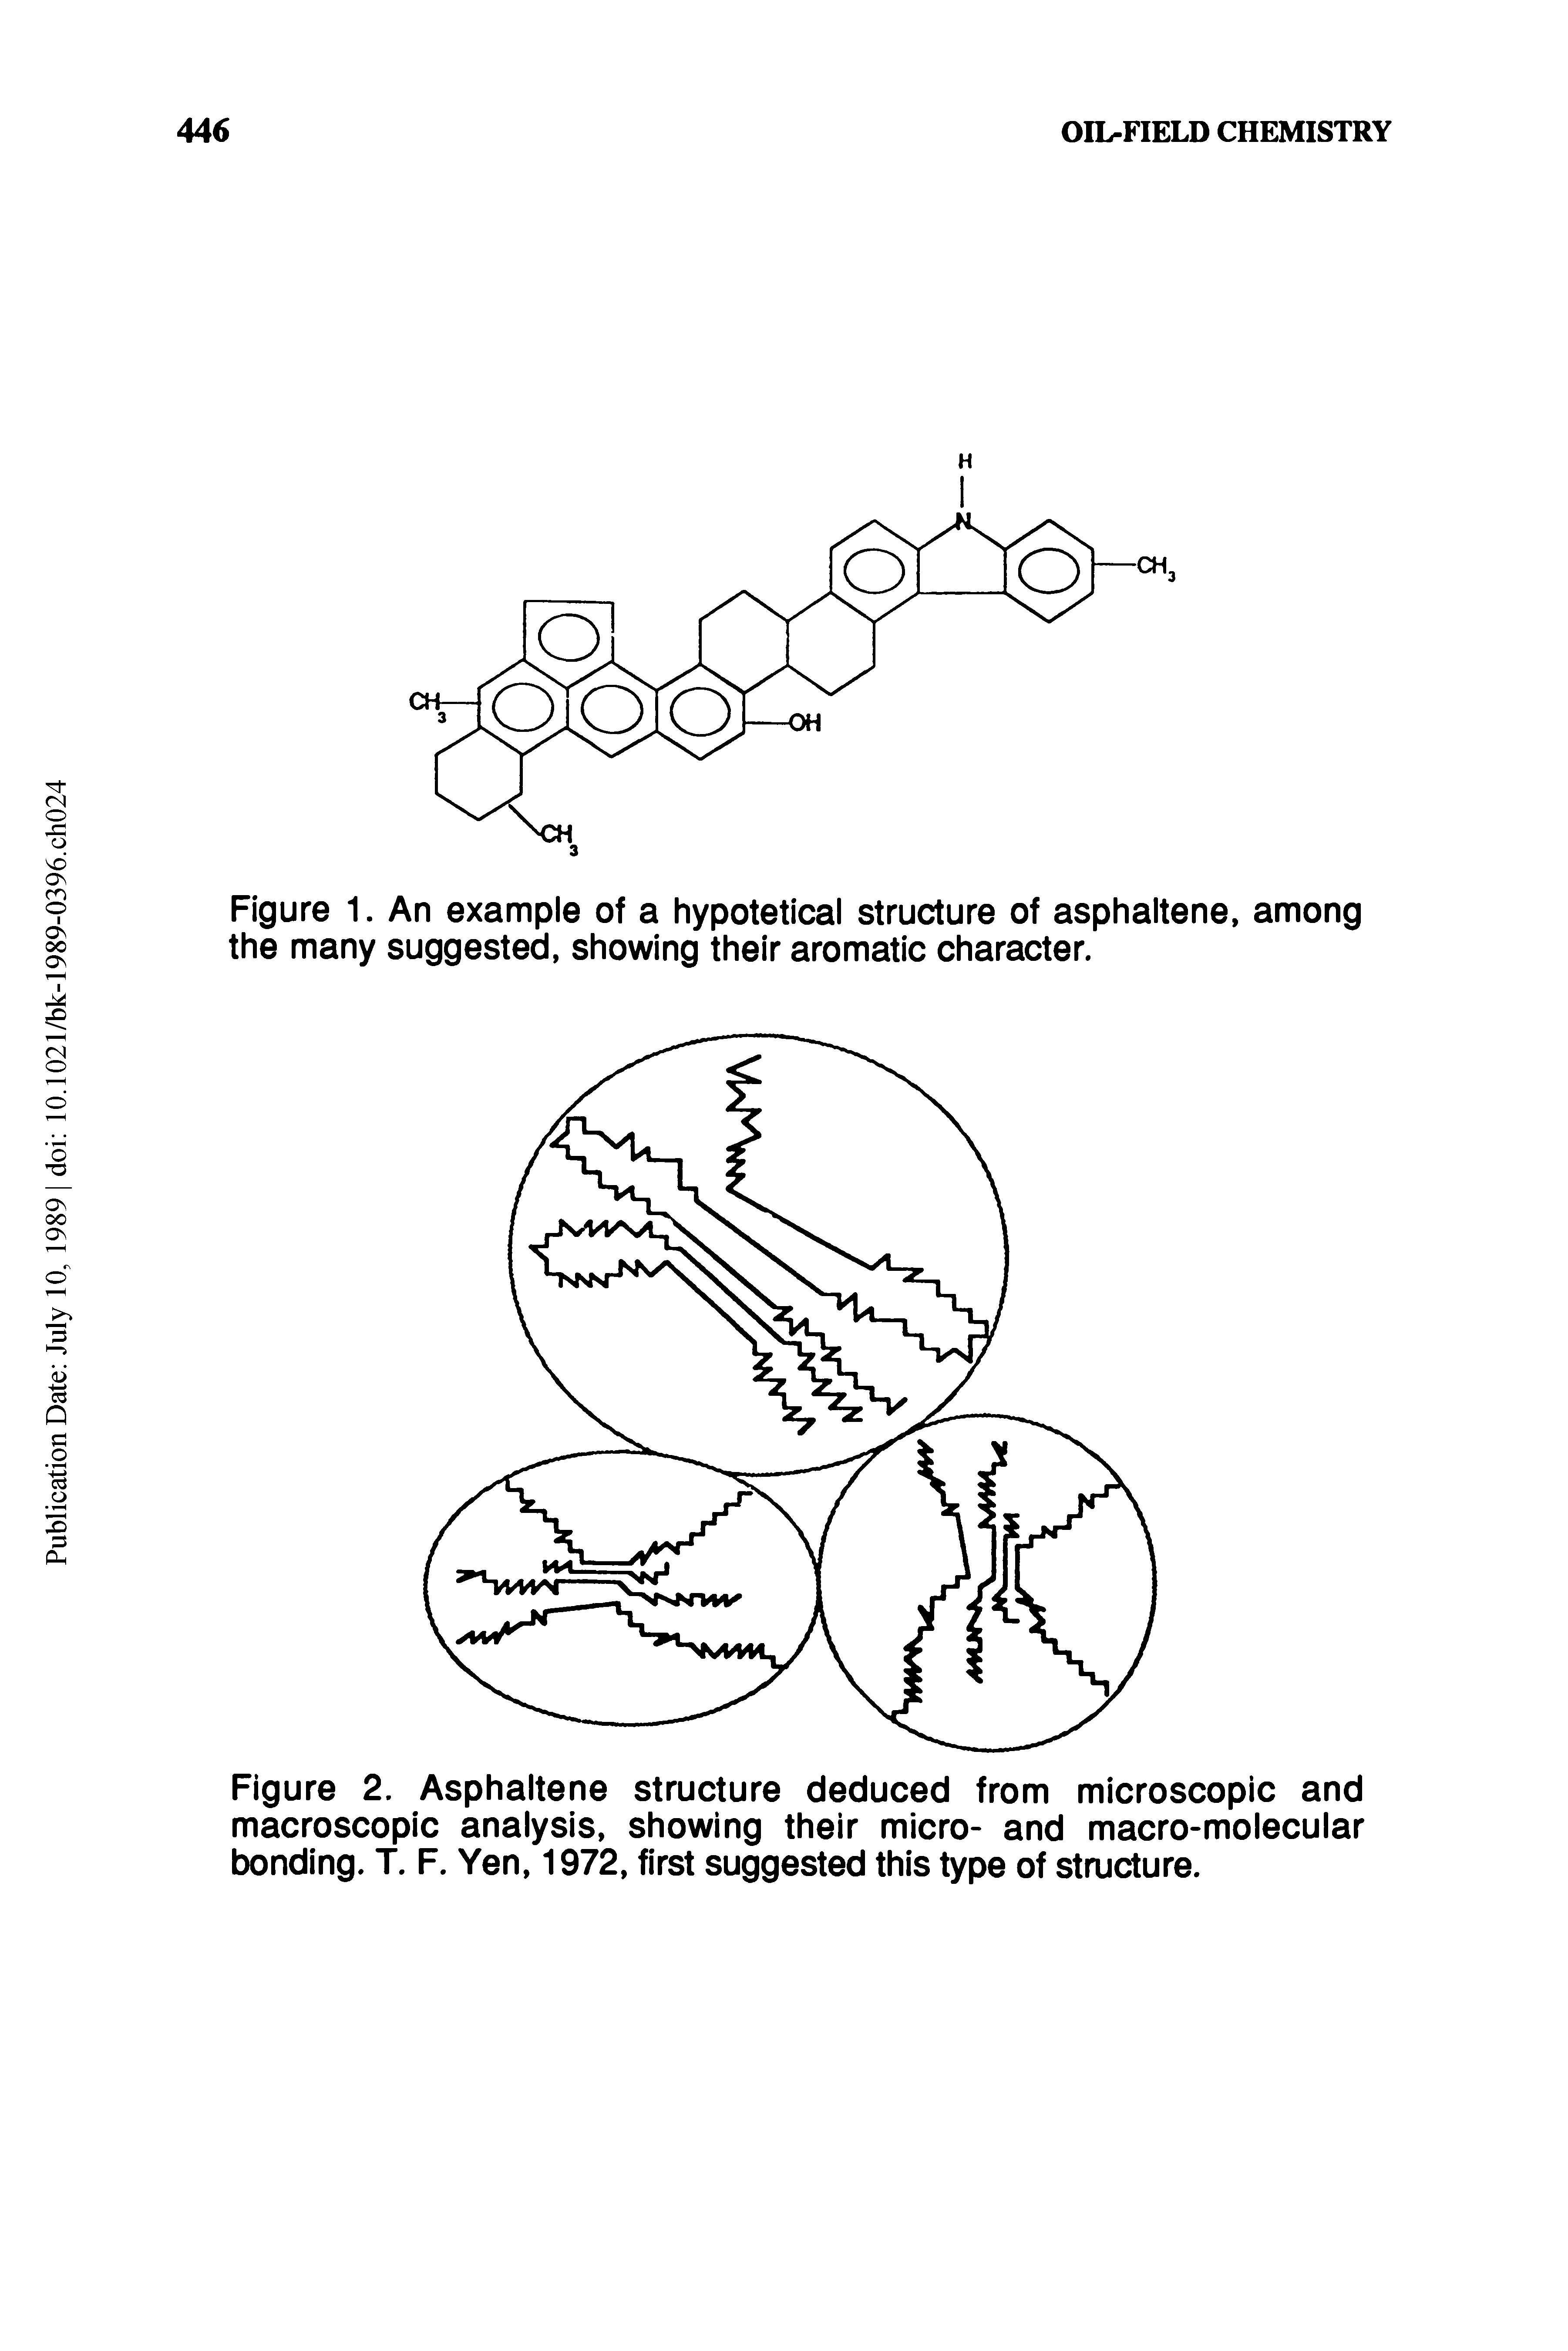 Figure 2. Asphaltene structure deduced from microscopic and macroscopic analysis, showing their micro- and macro-molecular bonding. T. F. Yen, 1972, first suggested this type of structure.